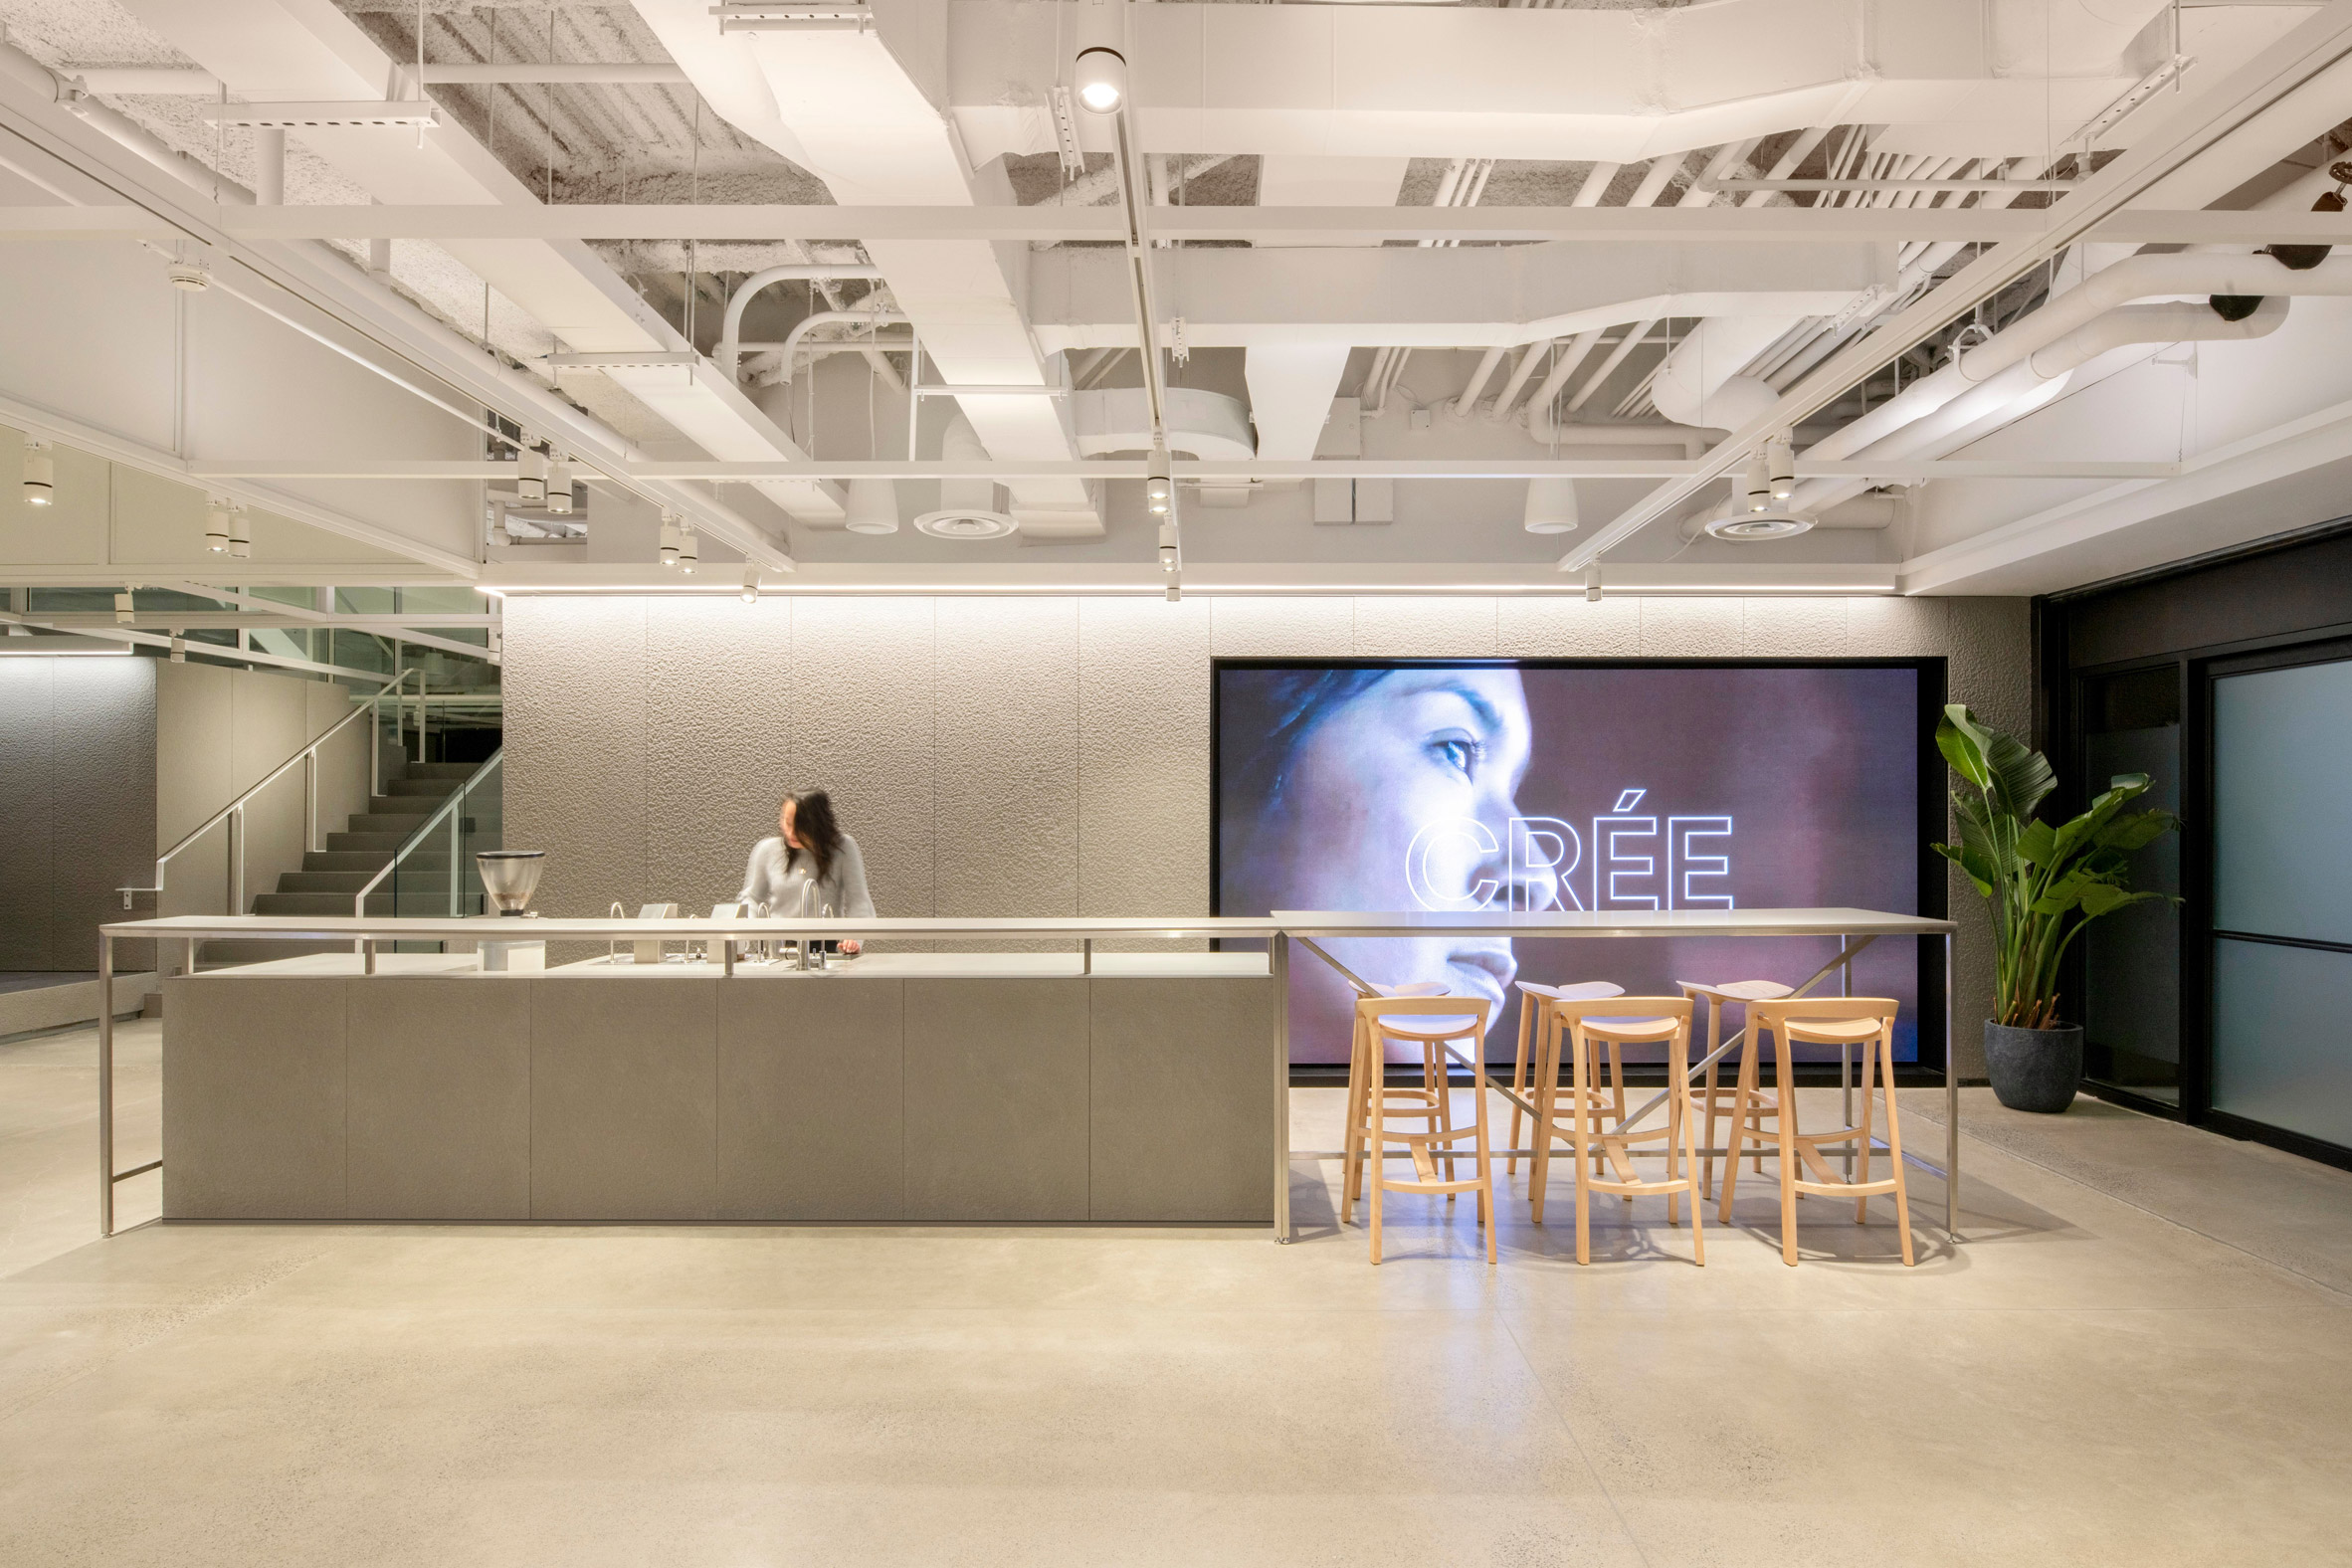 Ground floor of Sid Lee offices with coffee bar and digital screen